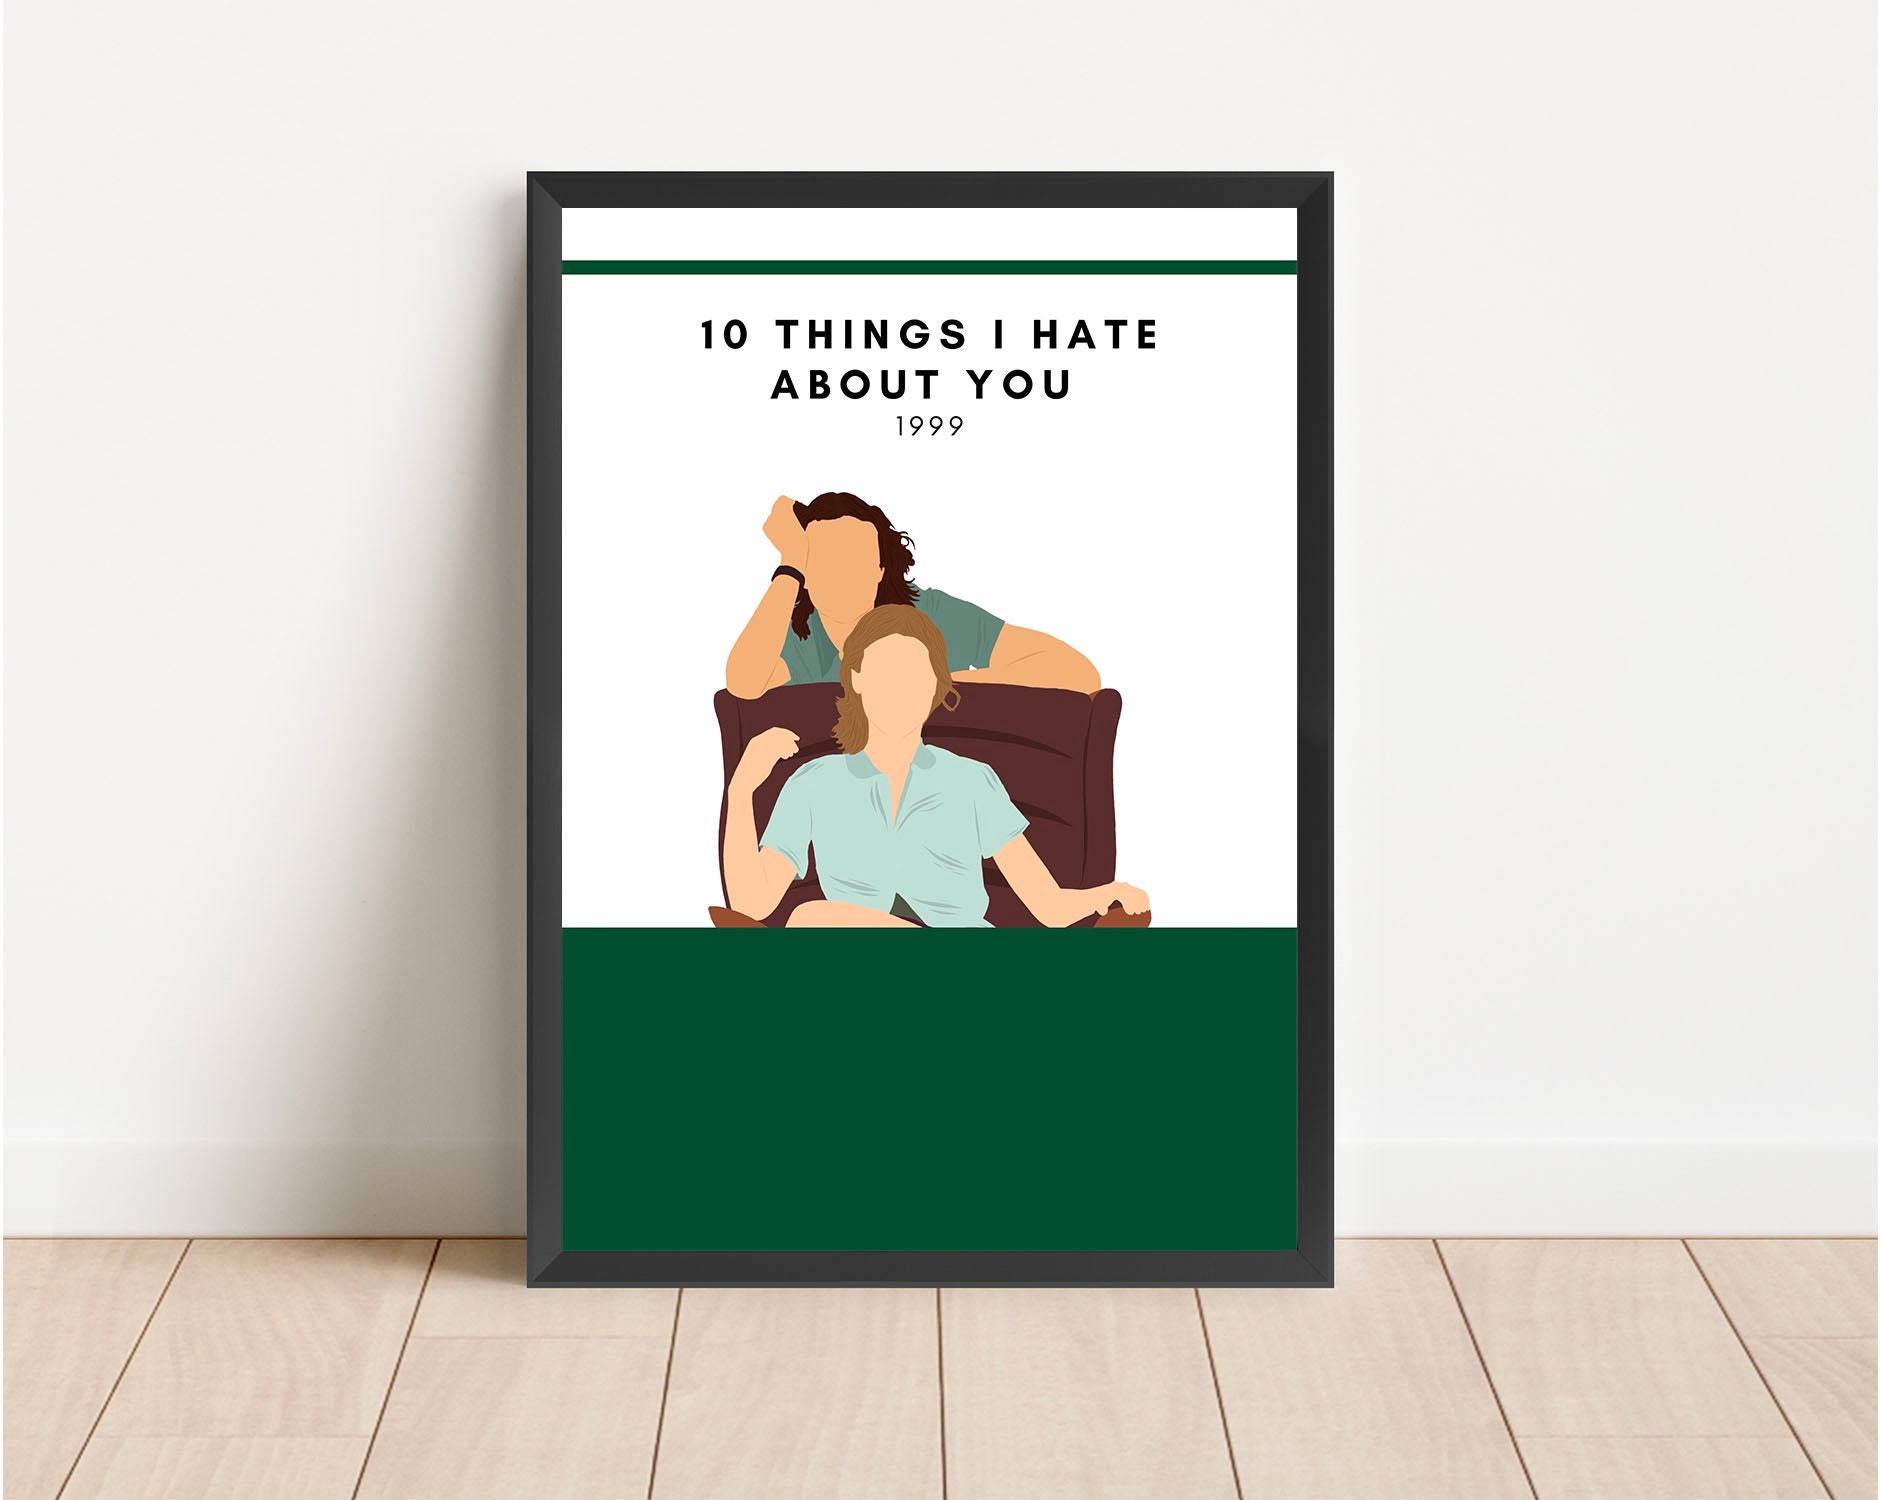 10 Things About You Premium Artwork Film Poster 